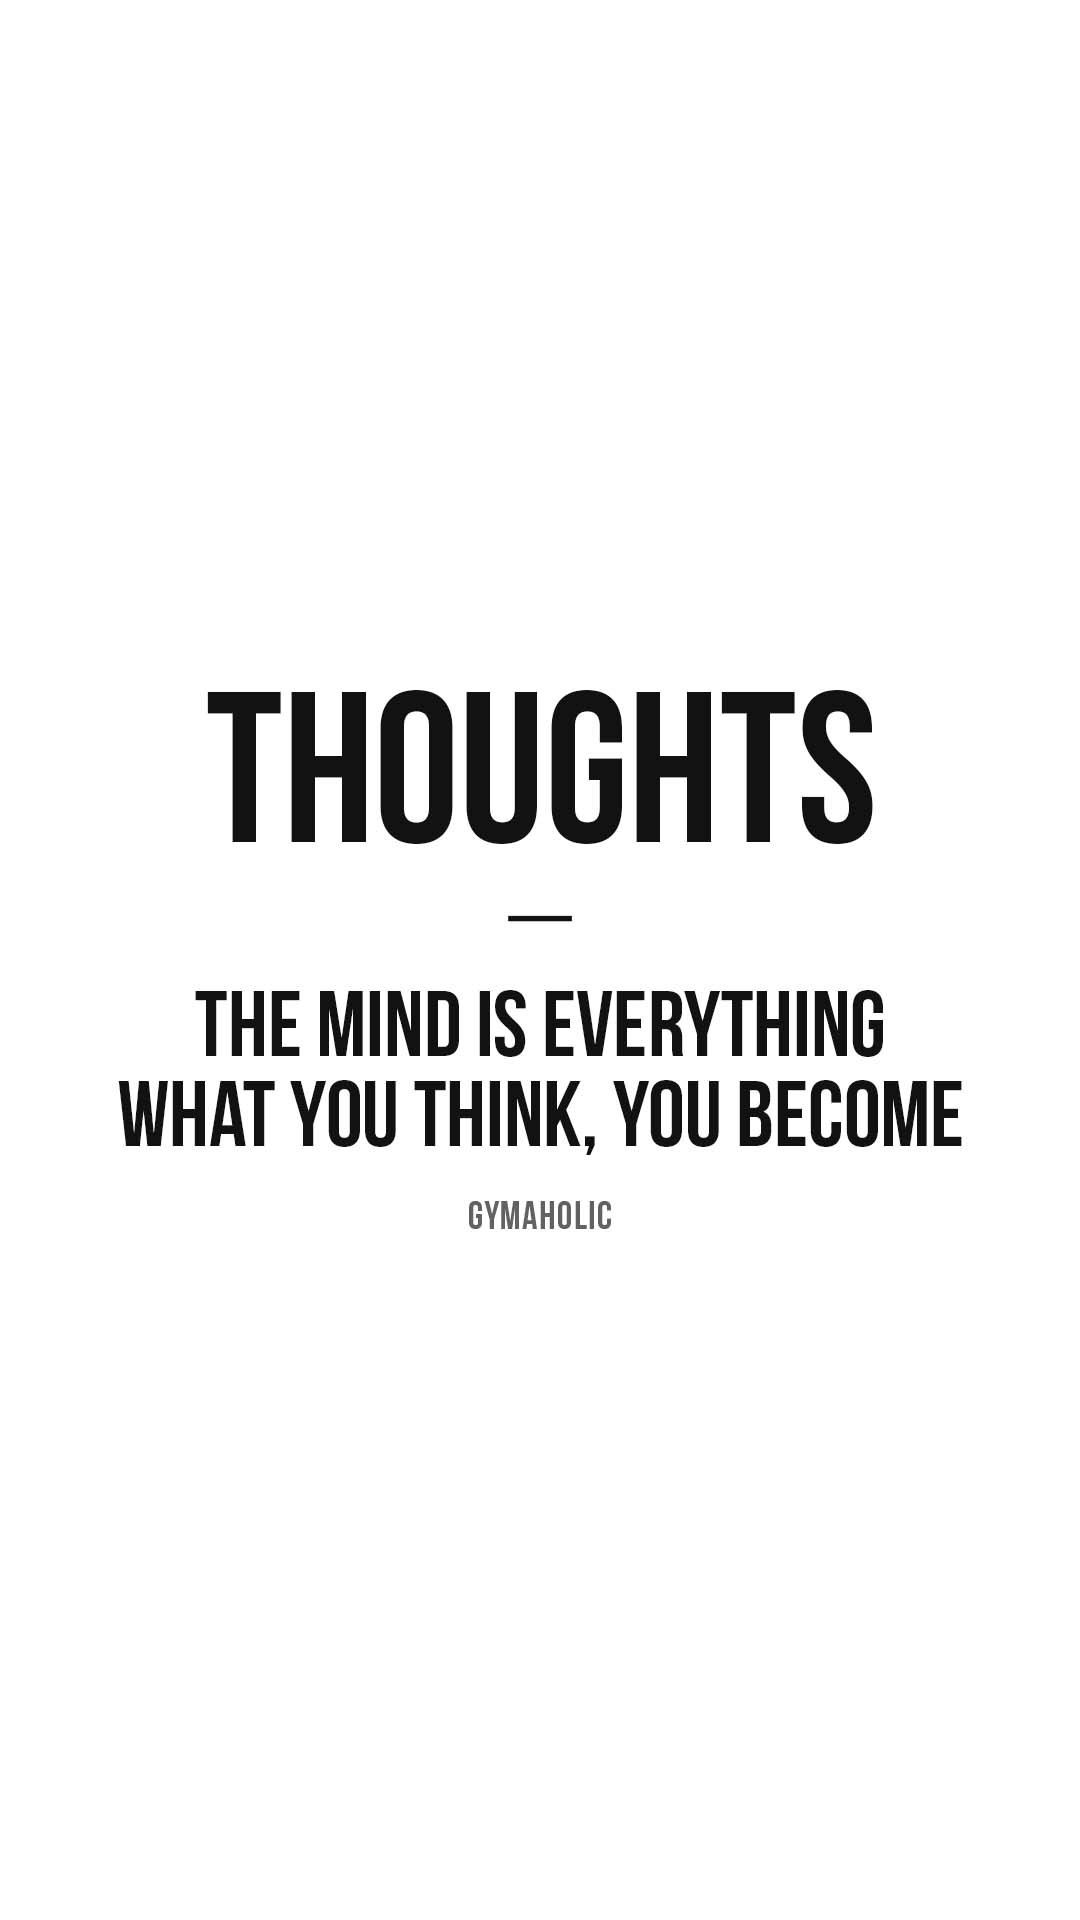 Thoughts: the mind is everything